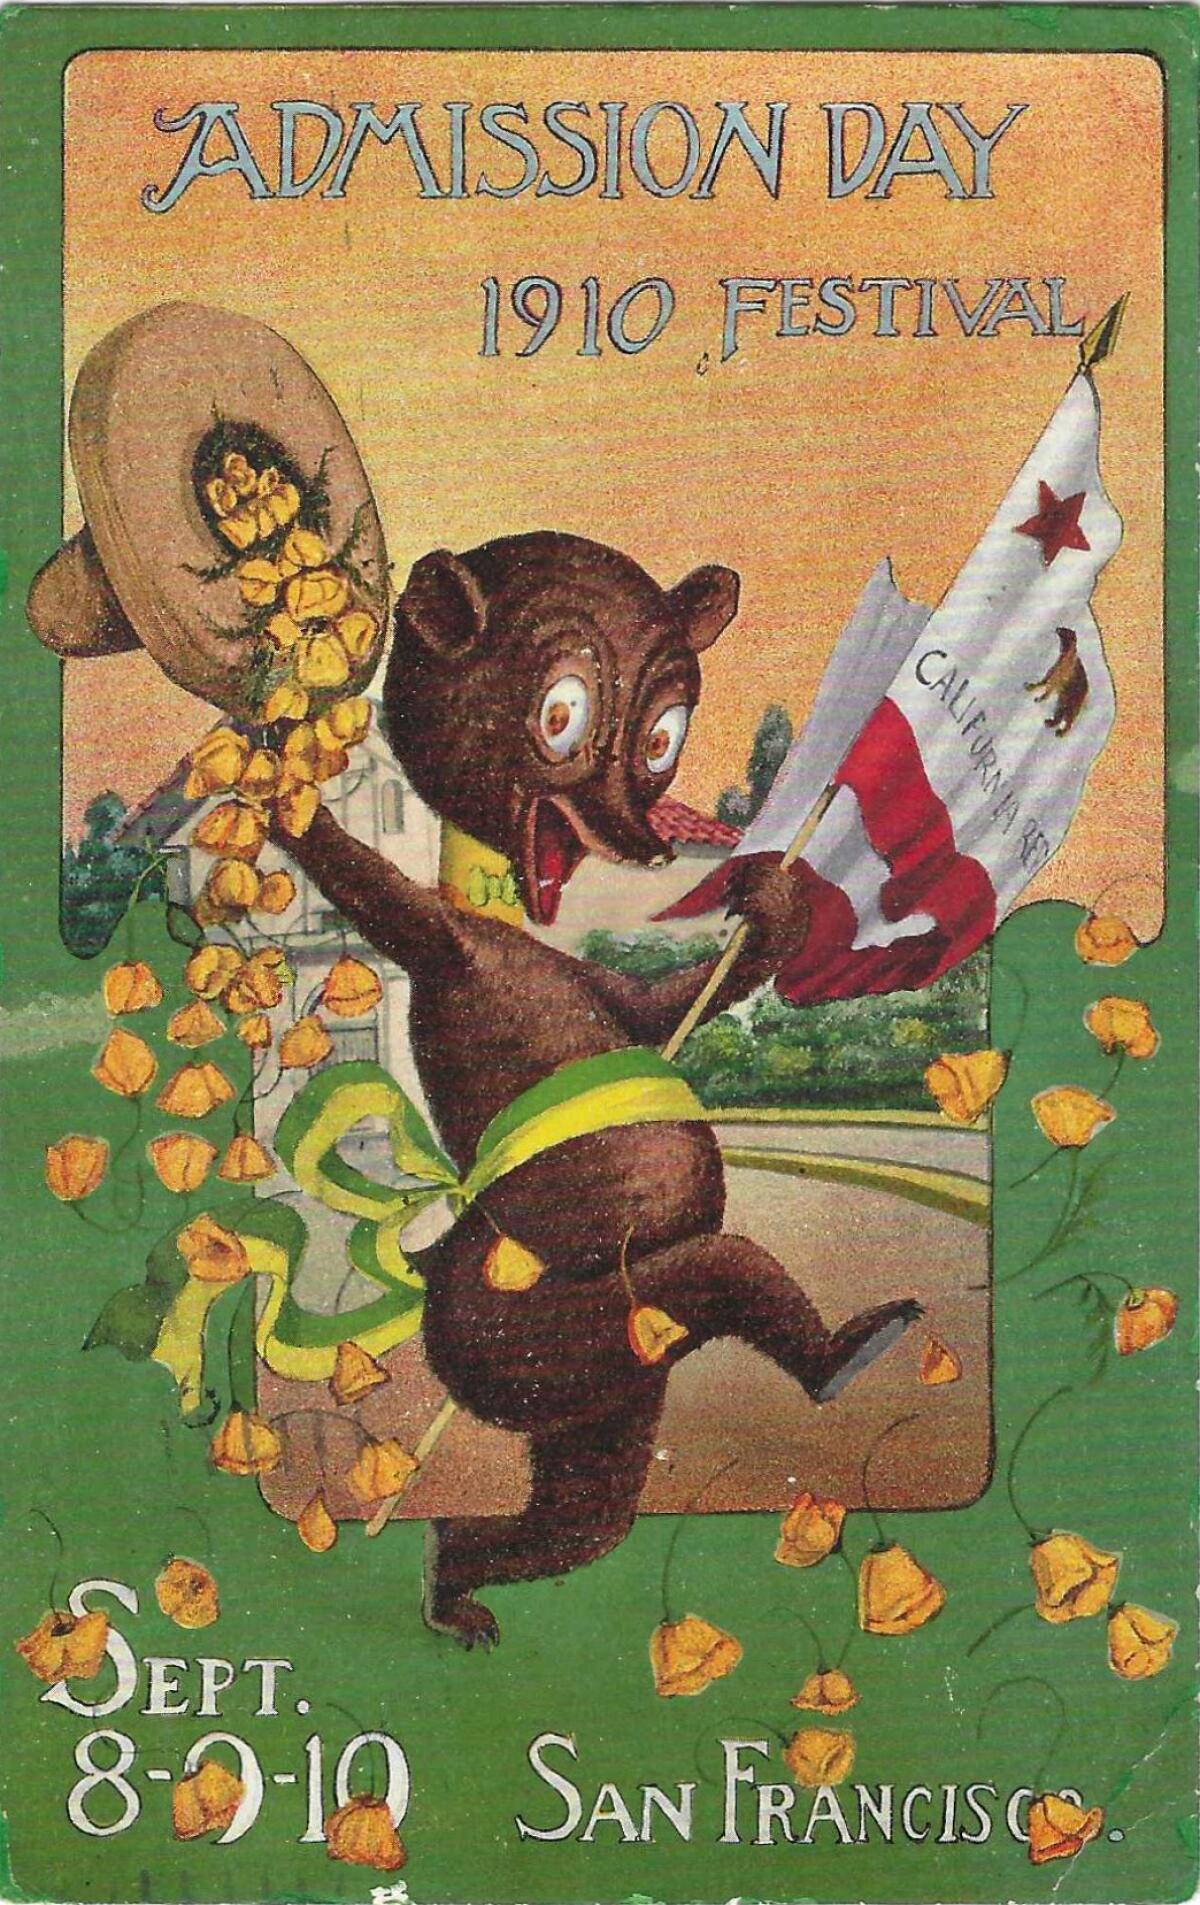 An illustration of a bear dancing and holding a flag and a hat overflowing with poppies.